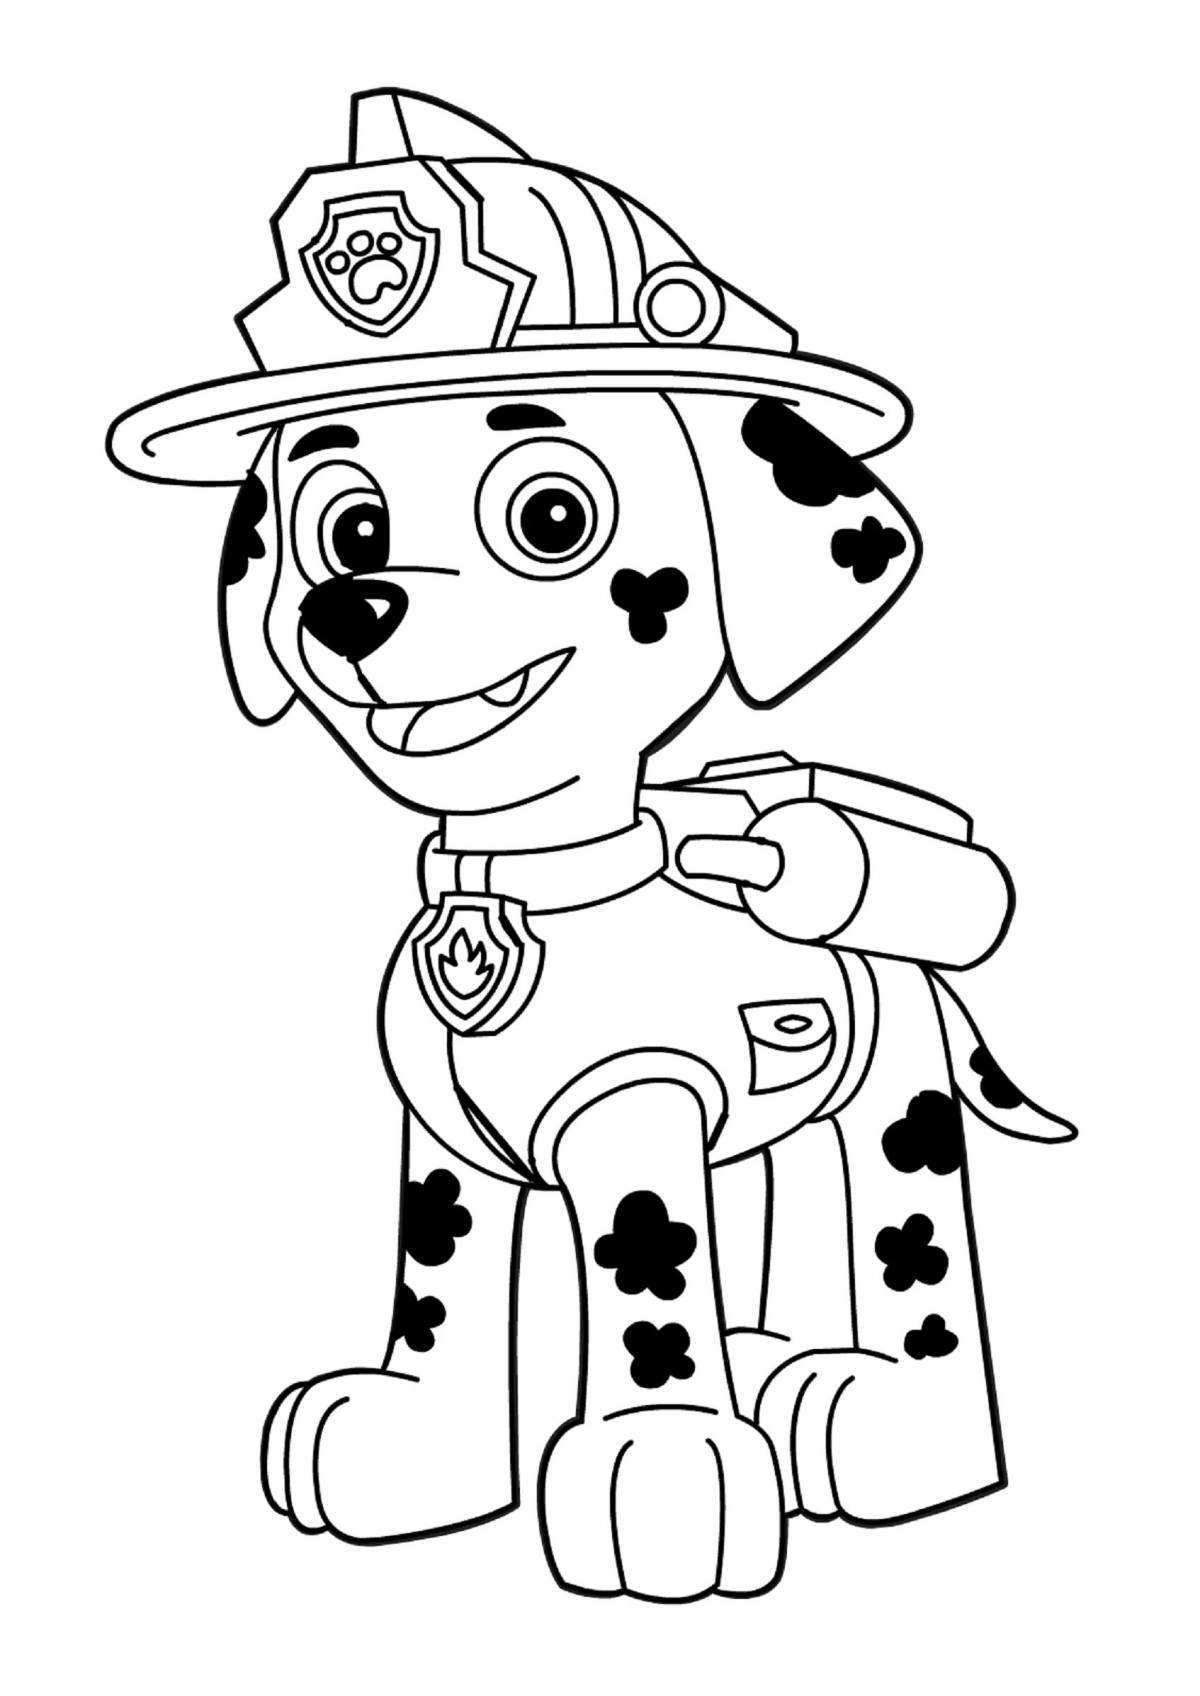 Paw Patrol quirky coloring book